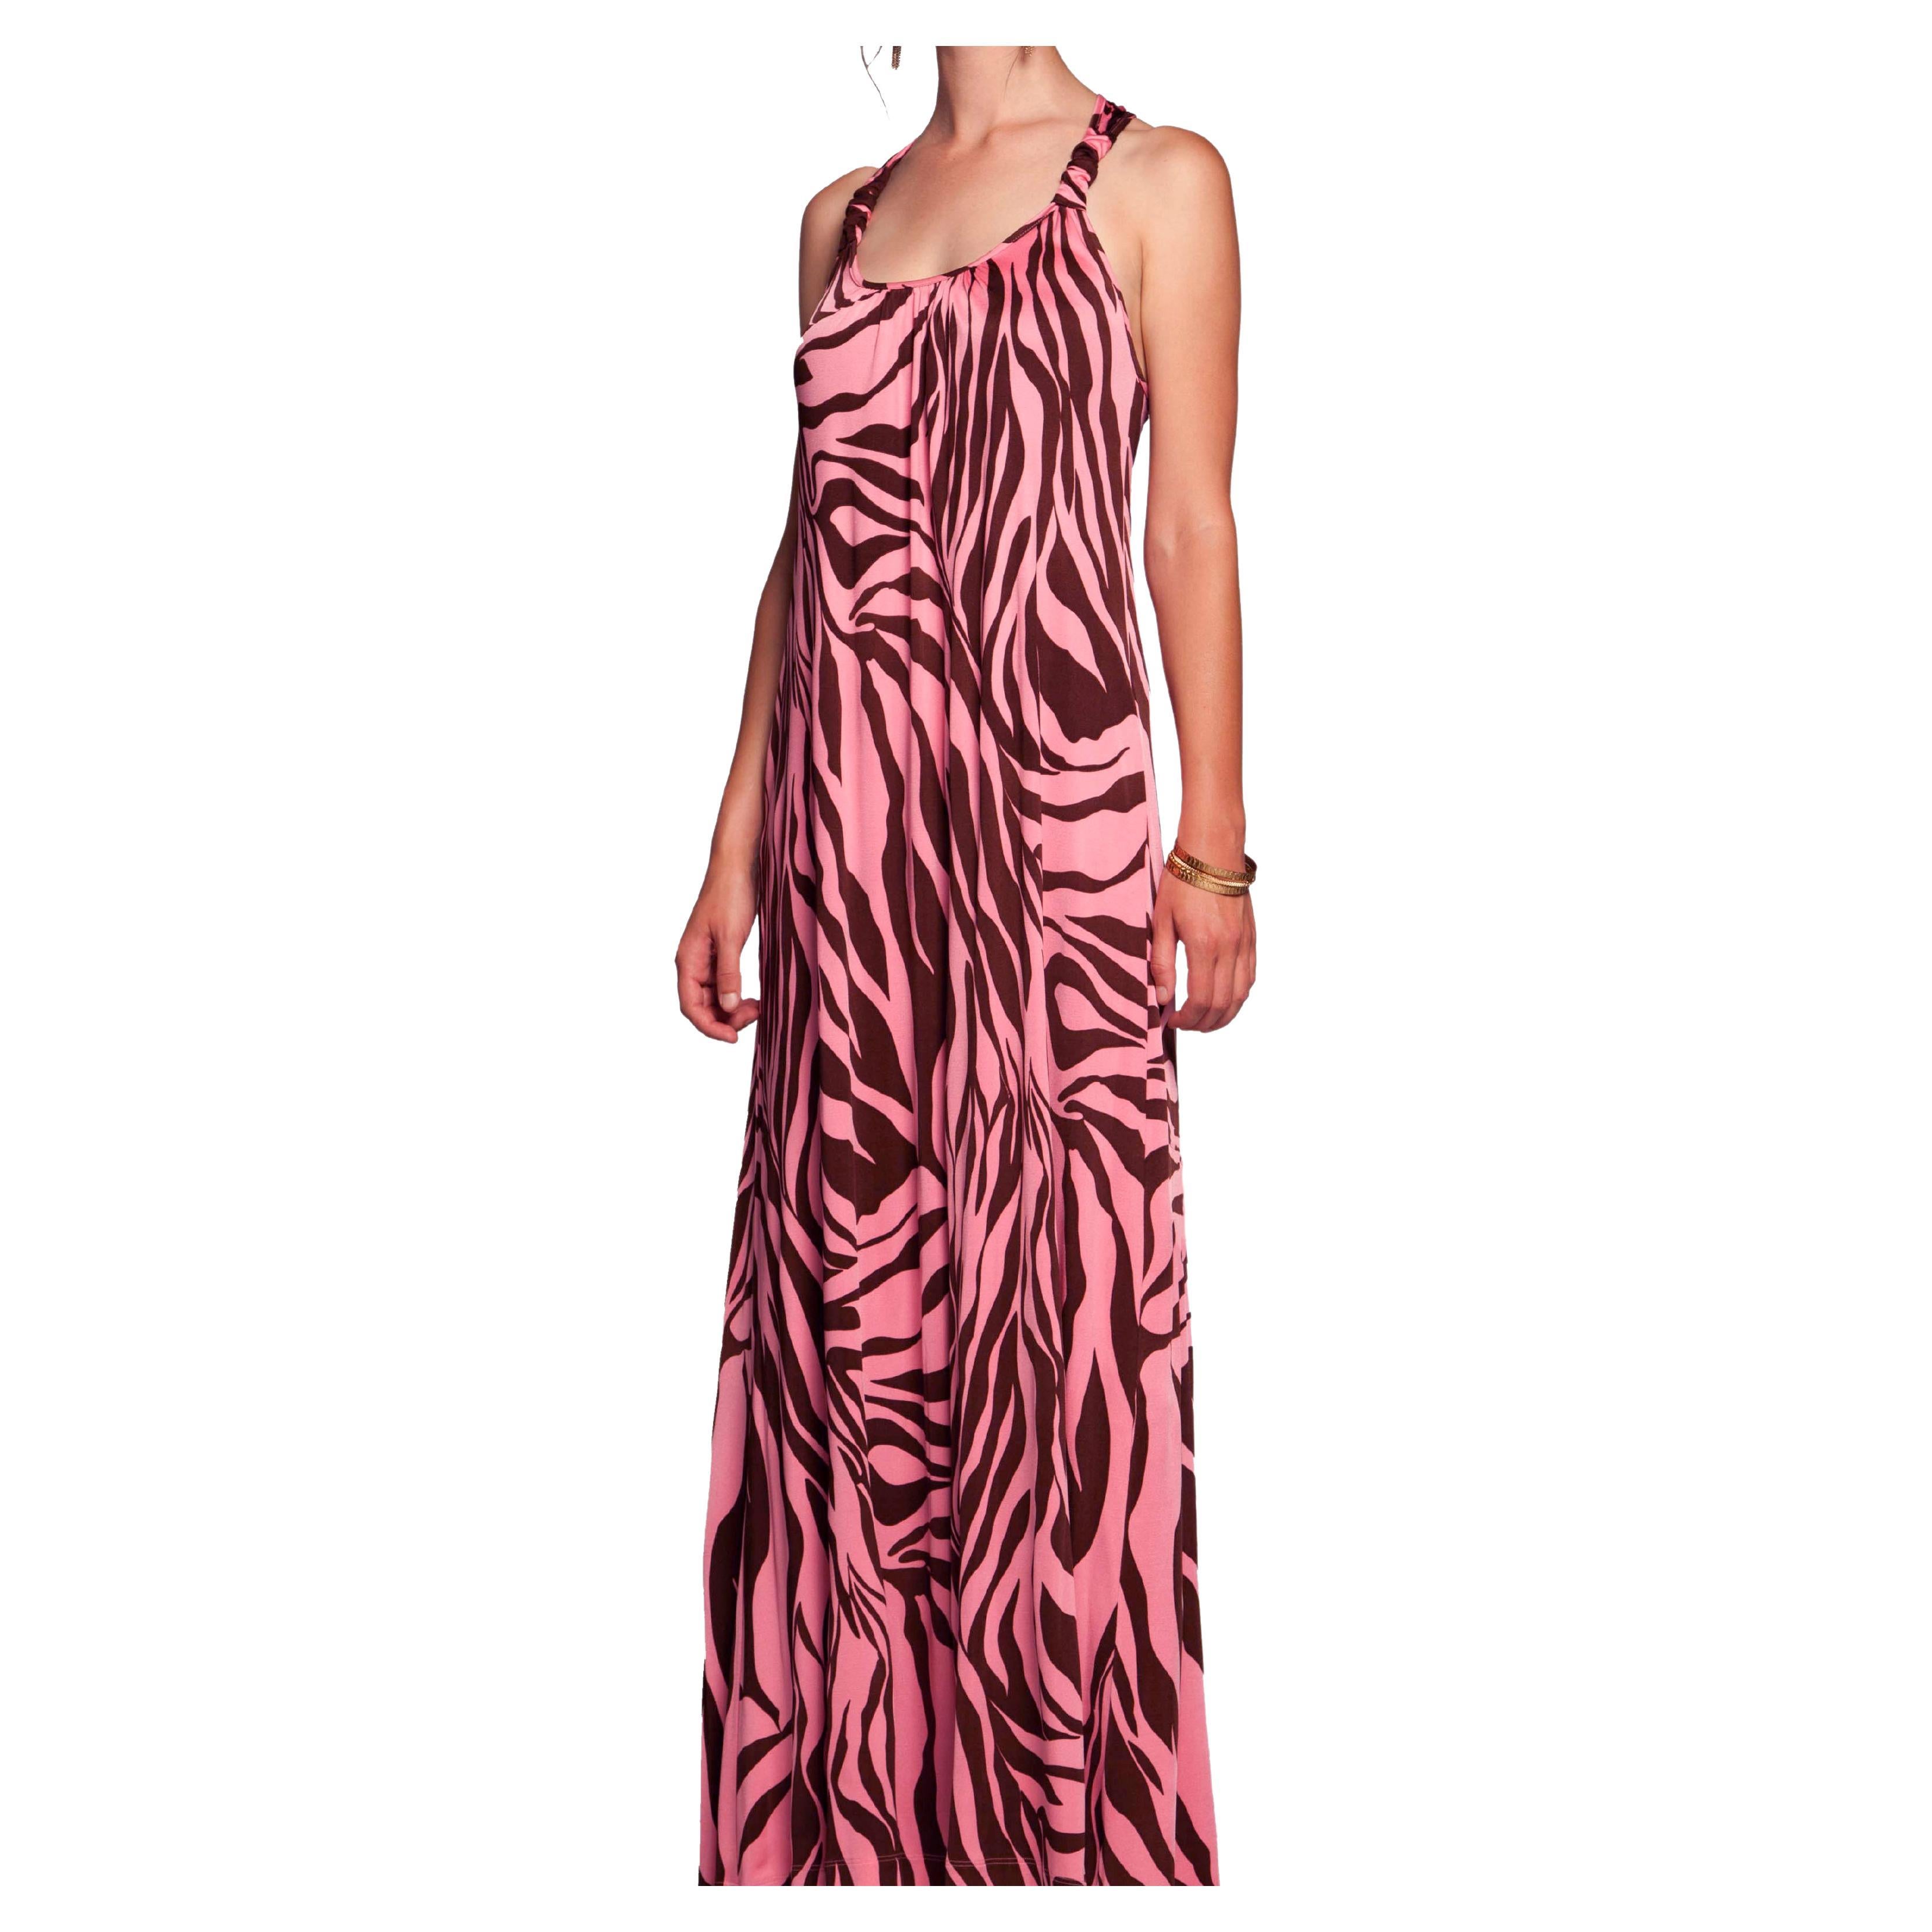 Rich chocolate brown and pink print silk jersey maxi halter dress with a generous, comfortable easy fit - with pockets!
Shirred front to enhance bust area. 
Yards of rich buttery silk jersey to create lots of volume with every